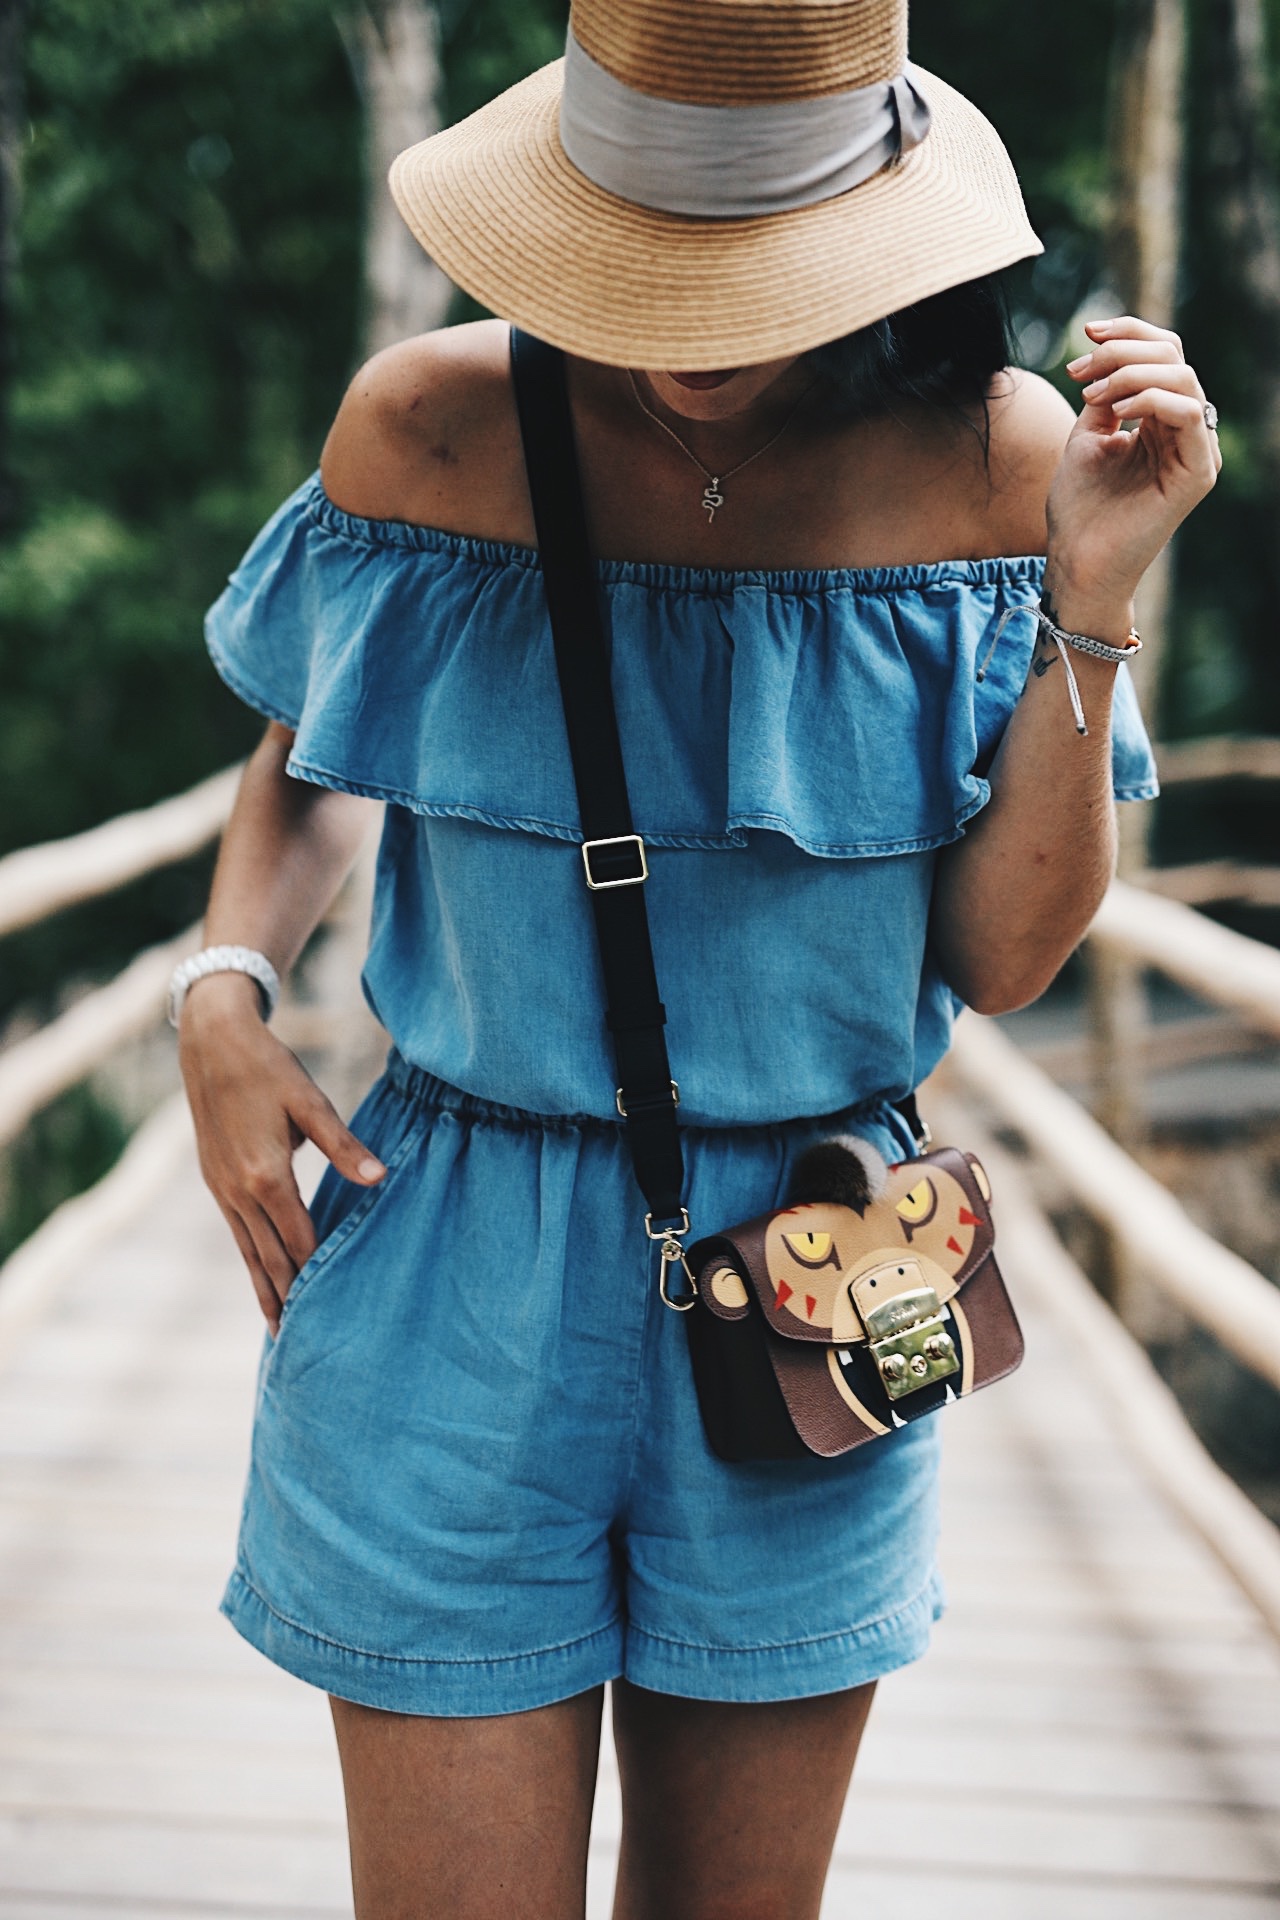 DTKAustin shares details on the most versatile Splendid chambray romper and how to wear it dressy for date night and casual on the beach. Click for more photos and details. | how to style a romper | how to wear a romper | romper style tips | summer fashion tips | summer outfit ideas | summer style tips | what to wear for summer | warm weather fashion | fashion for summer | style tips for summer | outfit ideas for summer || Dressed to Kill